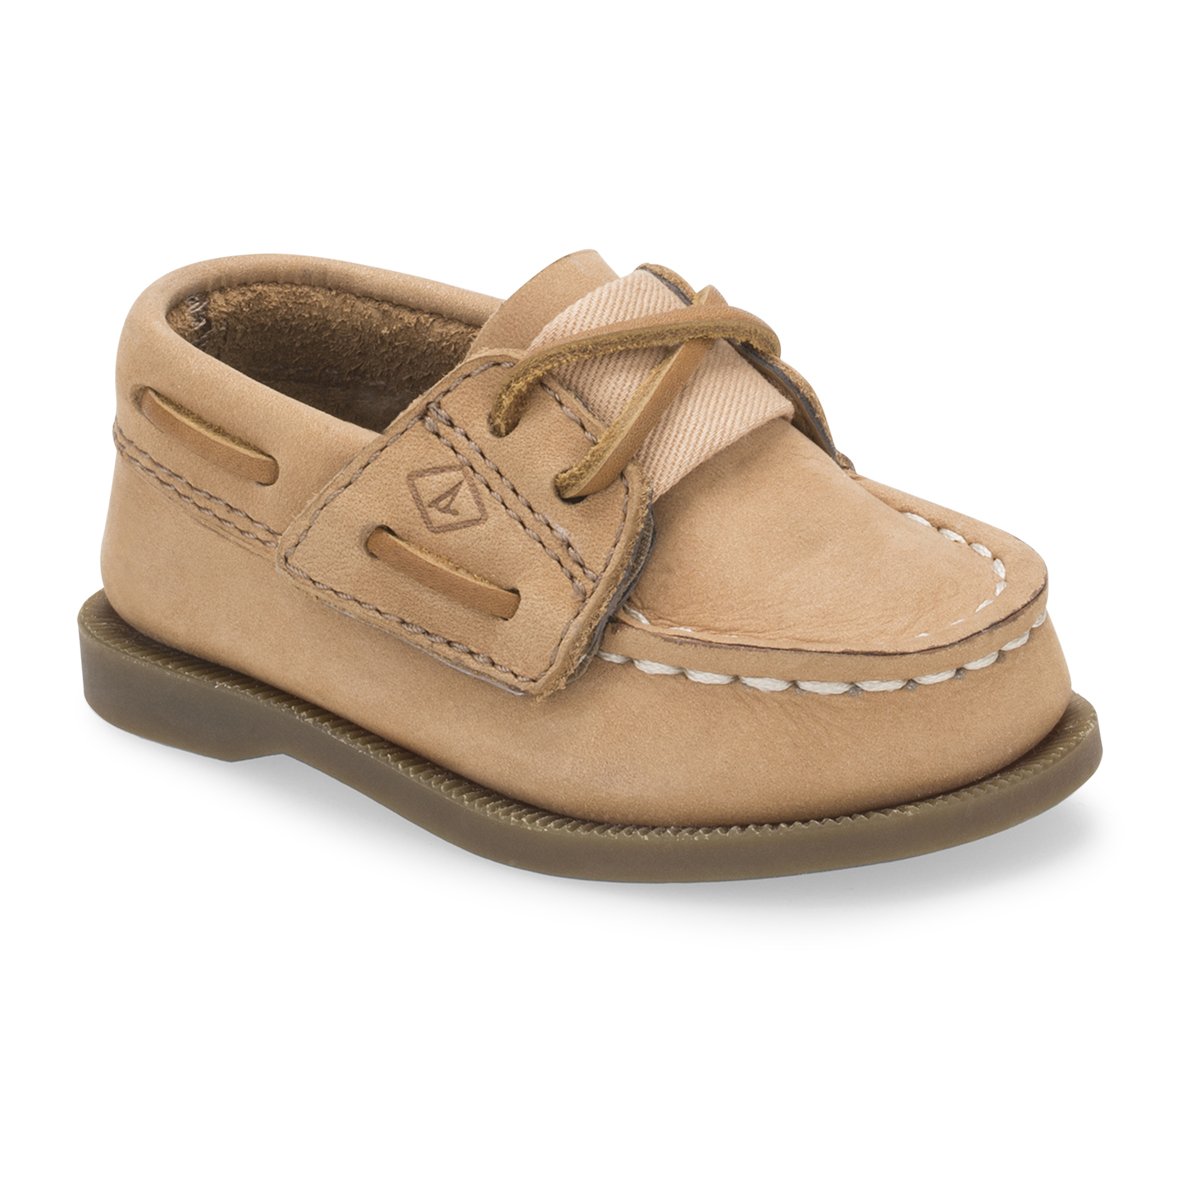 Sperry, $38 (youth)